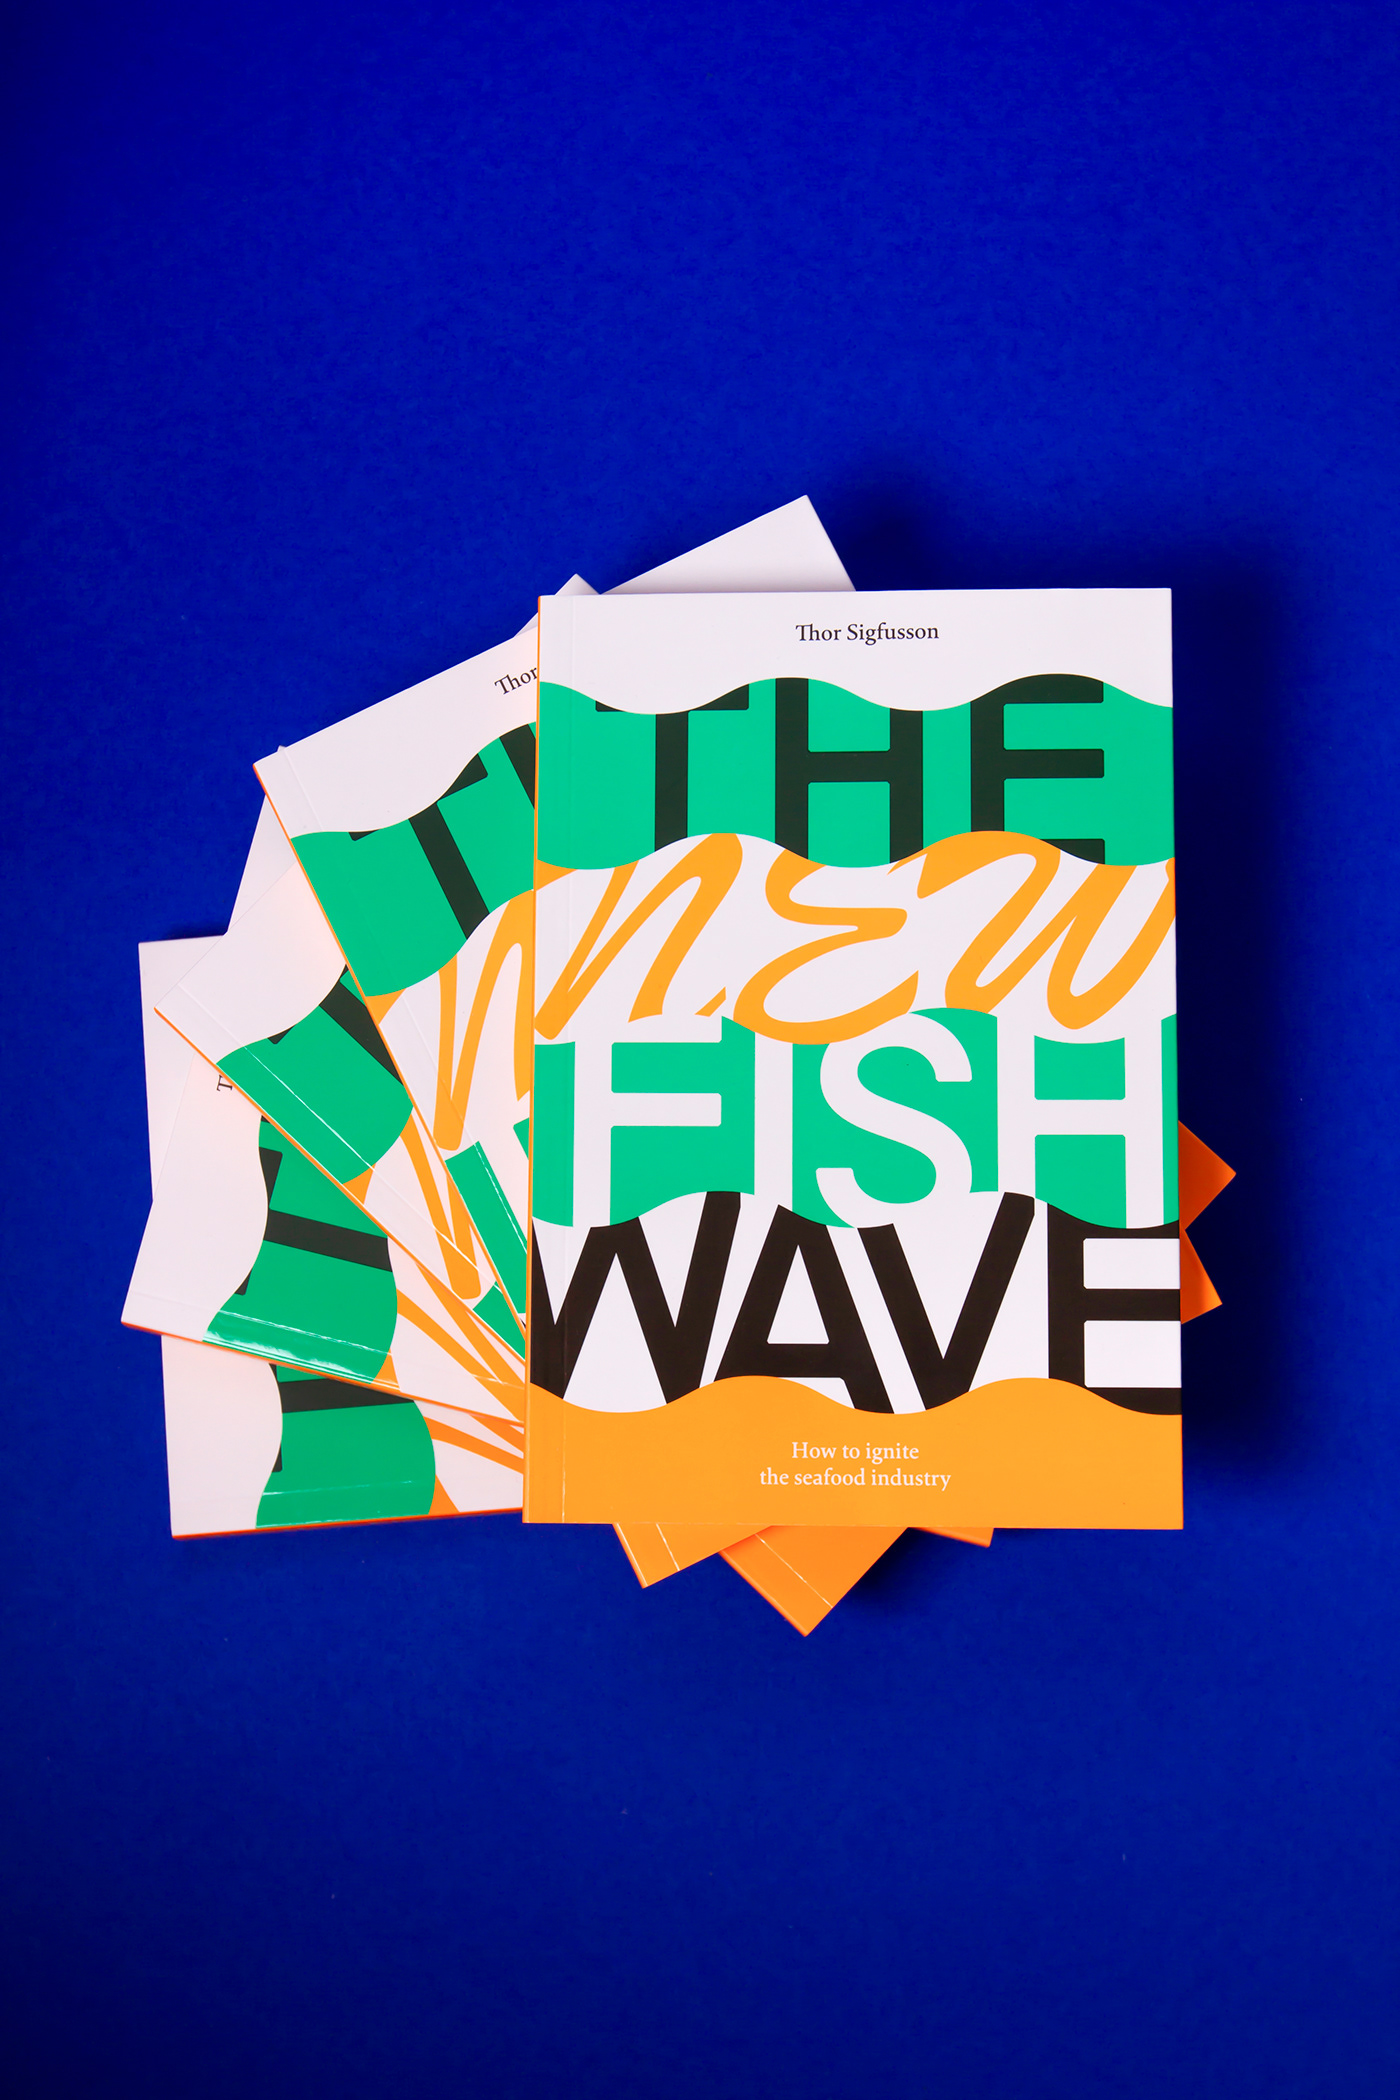 cluster fish fisheries graphic design  iceland innovation Ocean pantone Sustainability wave